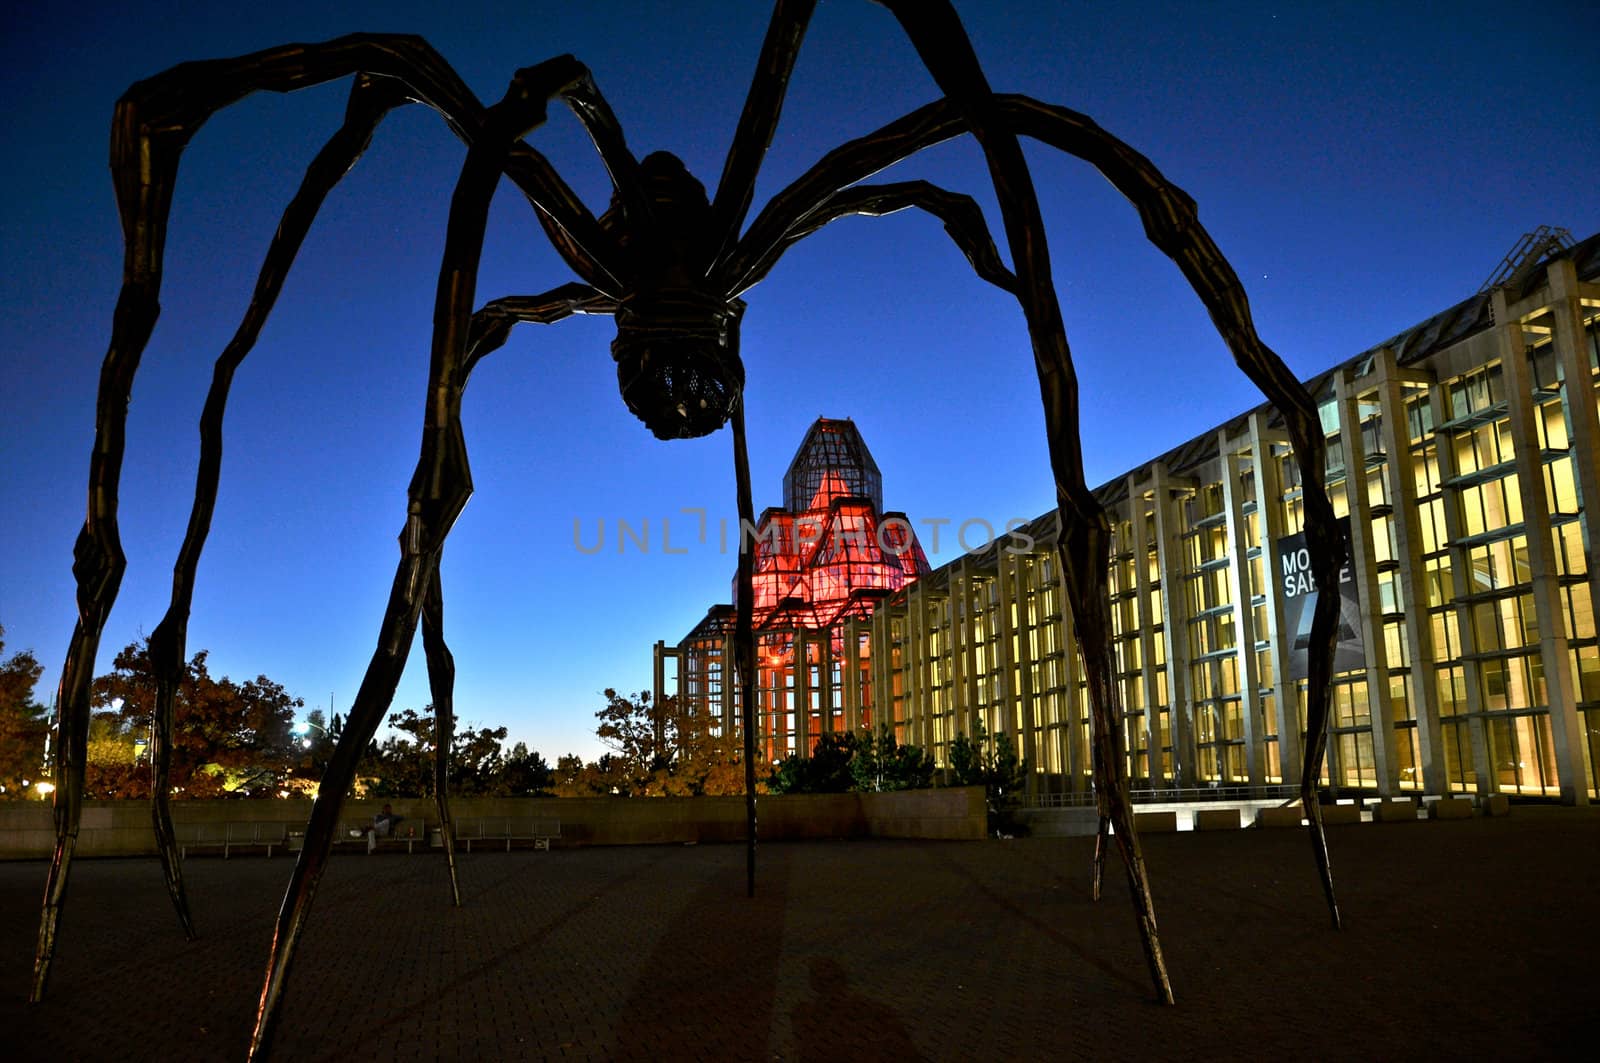 The National Gallery of Art in Ottawa with Louise Bourgeois' spider sculpture in the foreground.